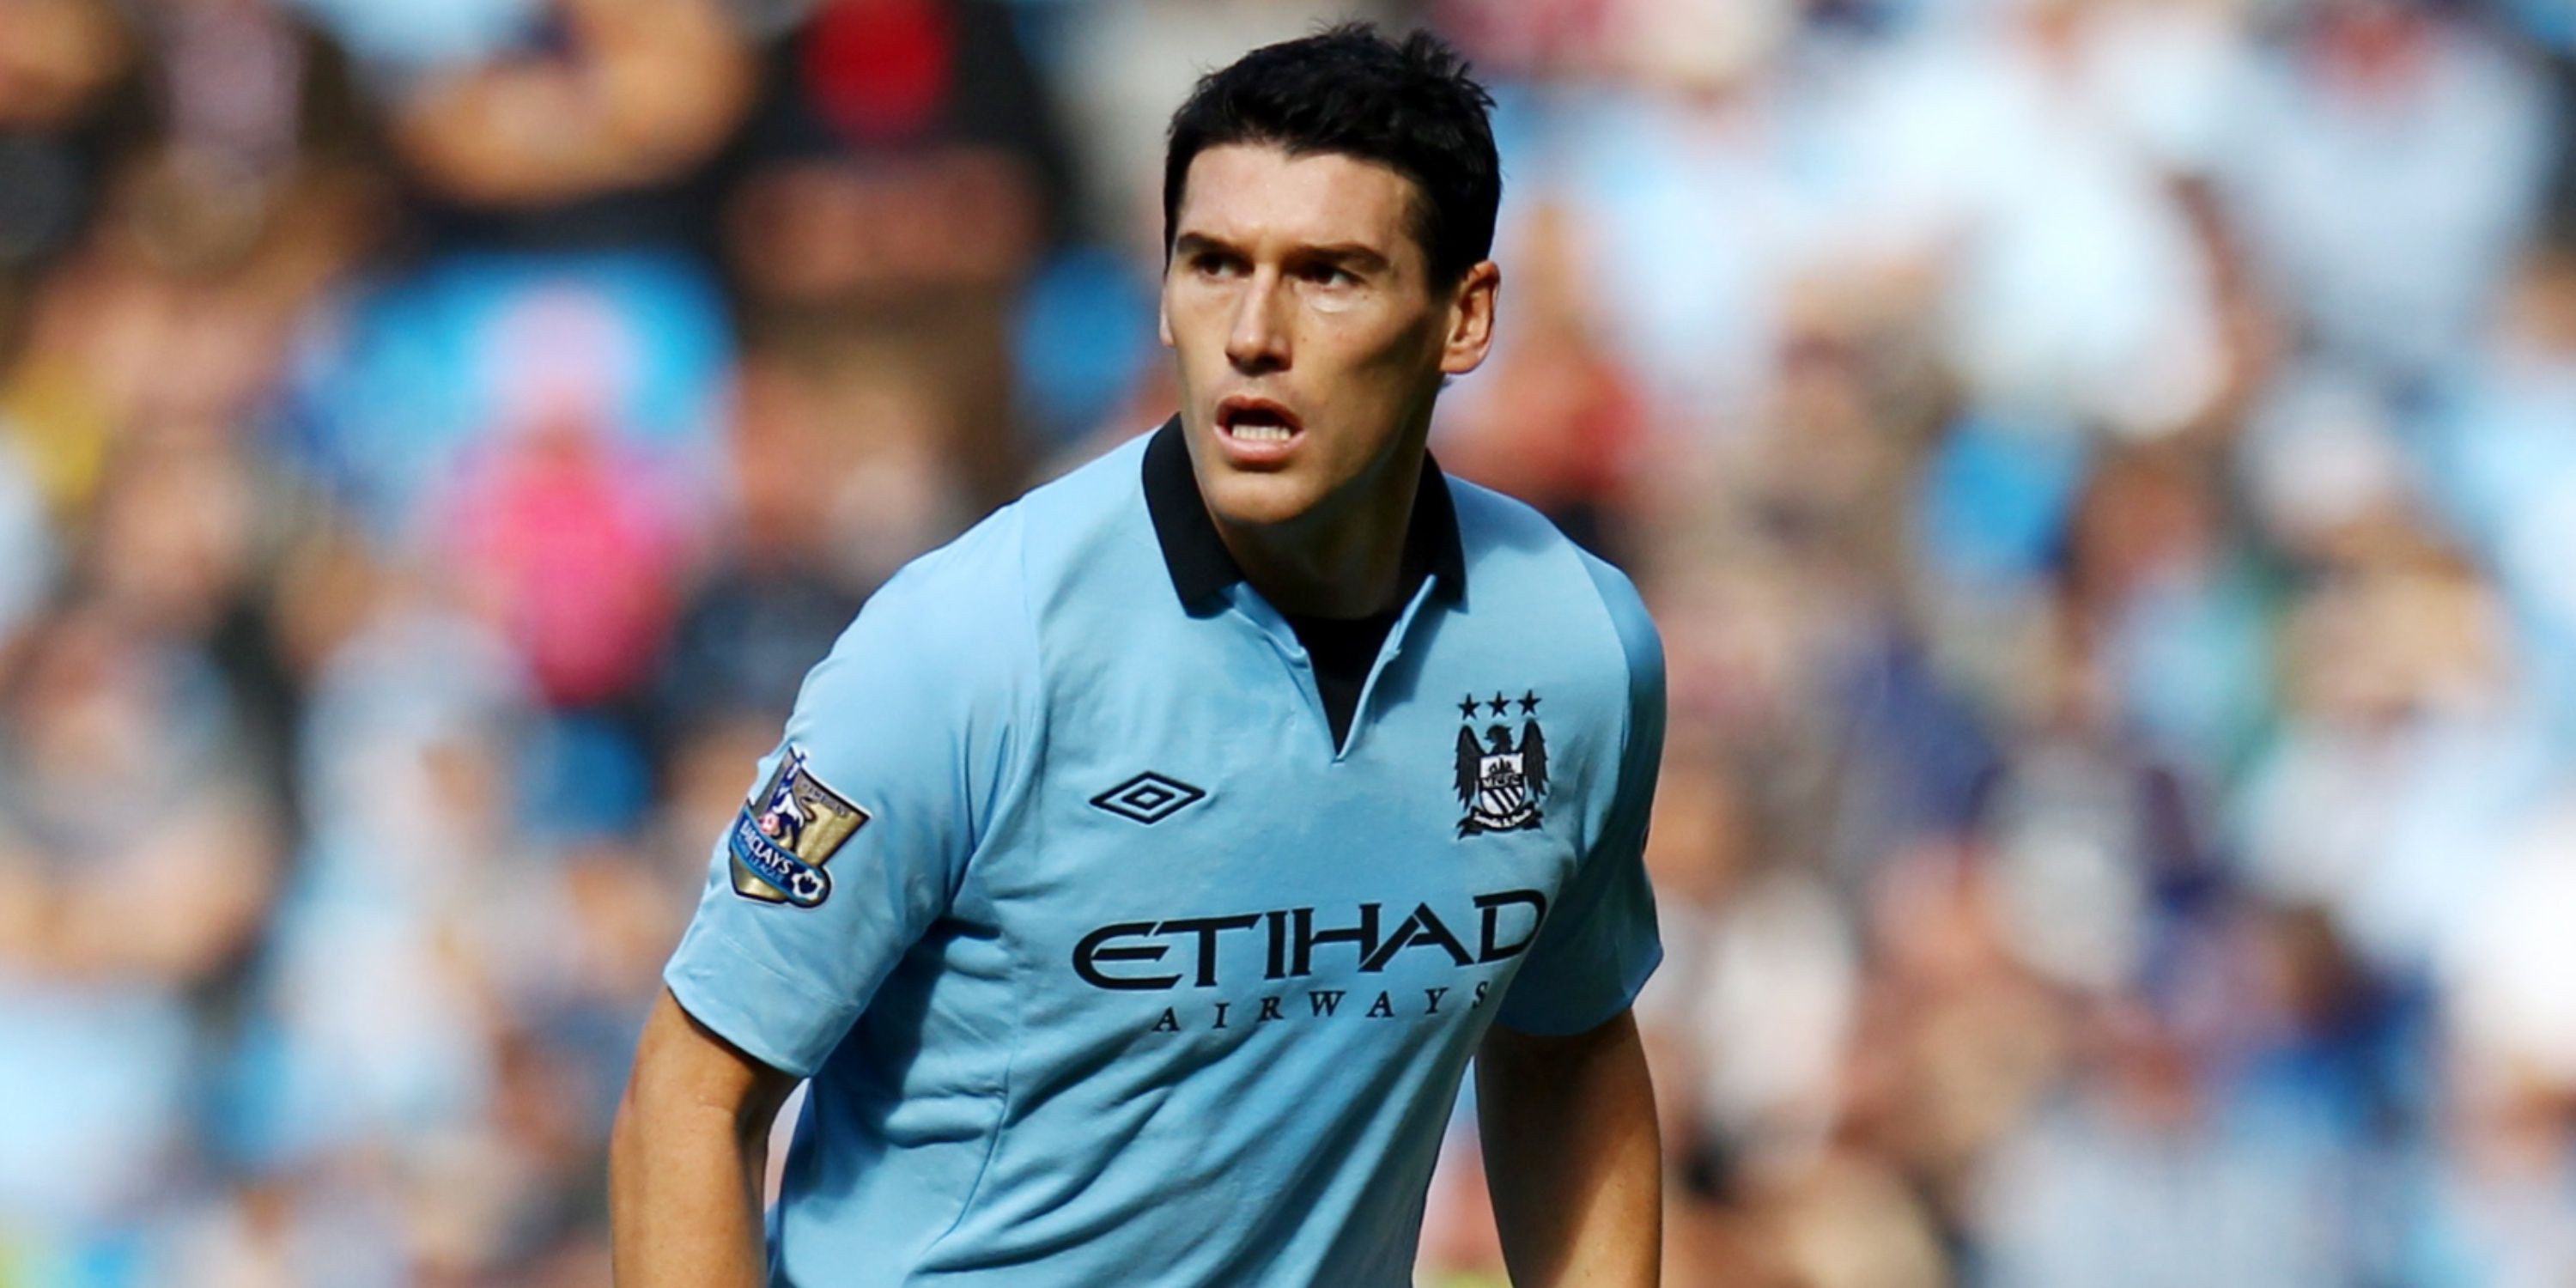 Gareth Barry in action for Manchester City